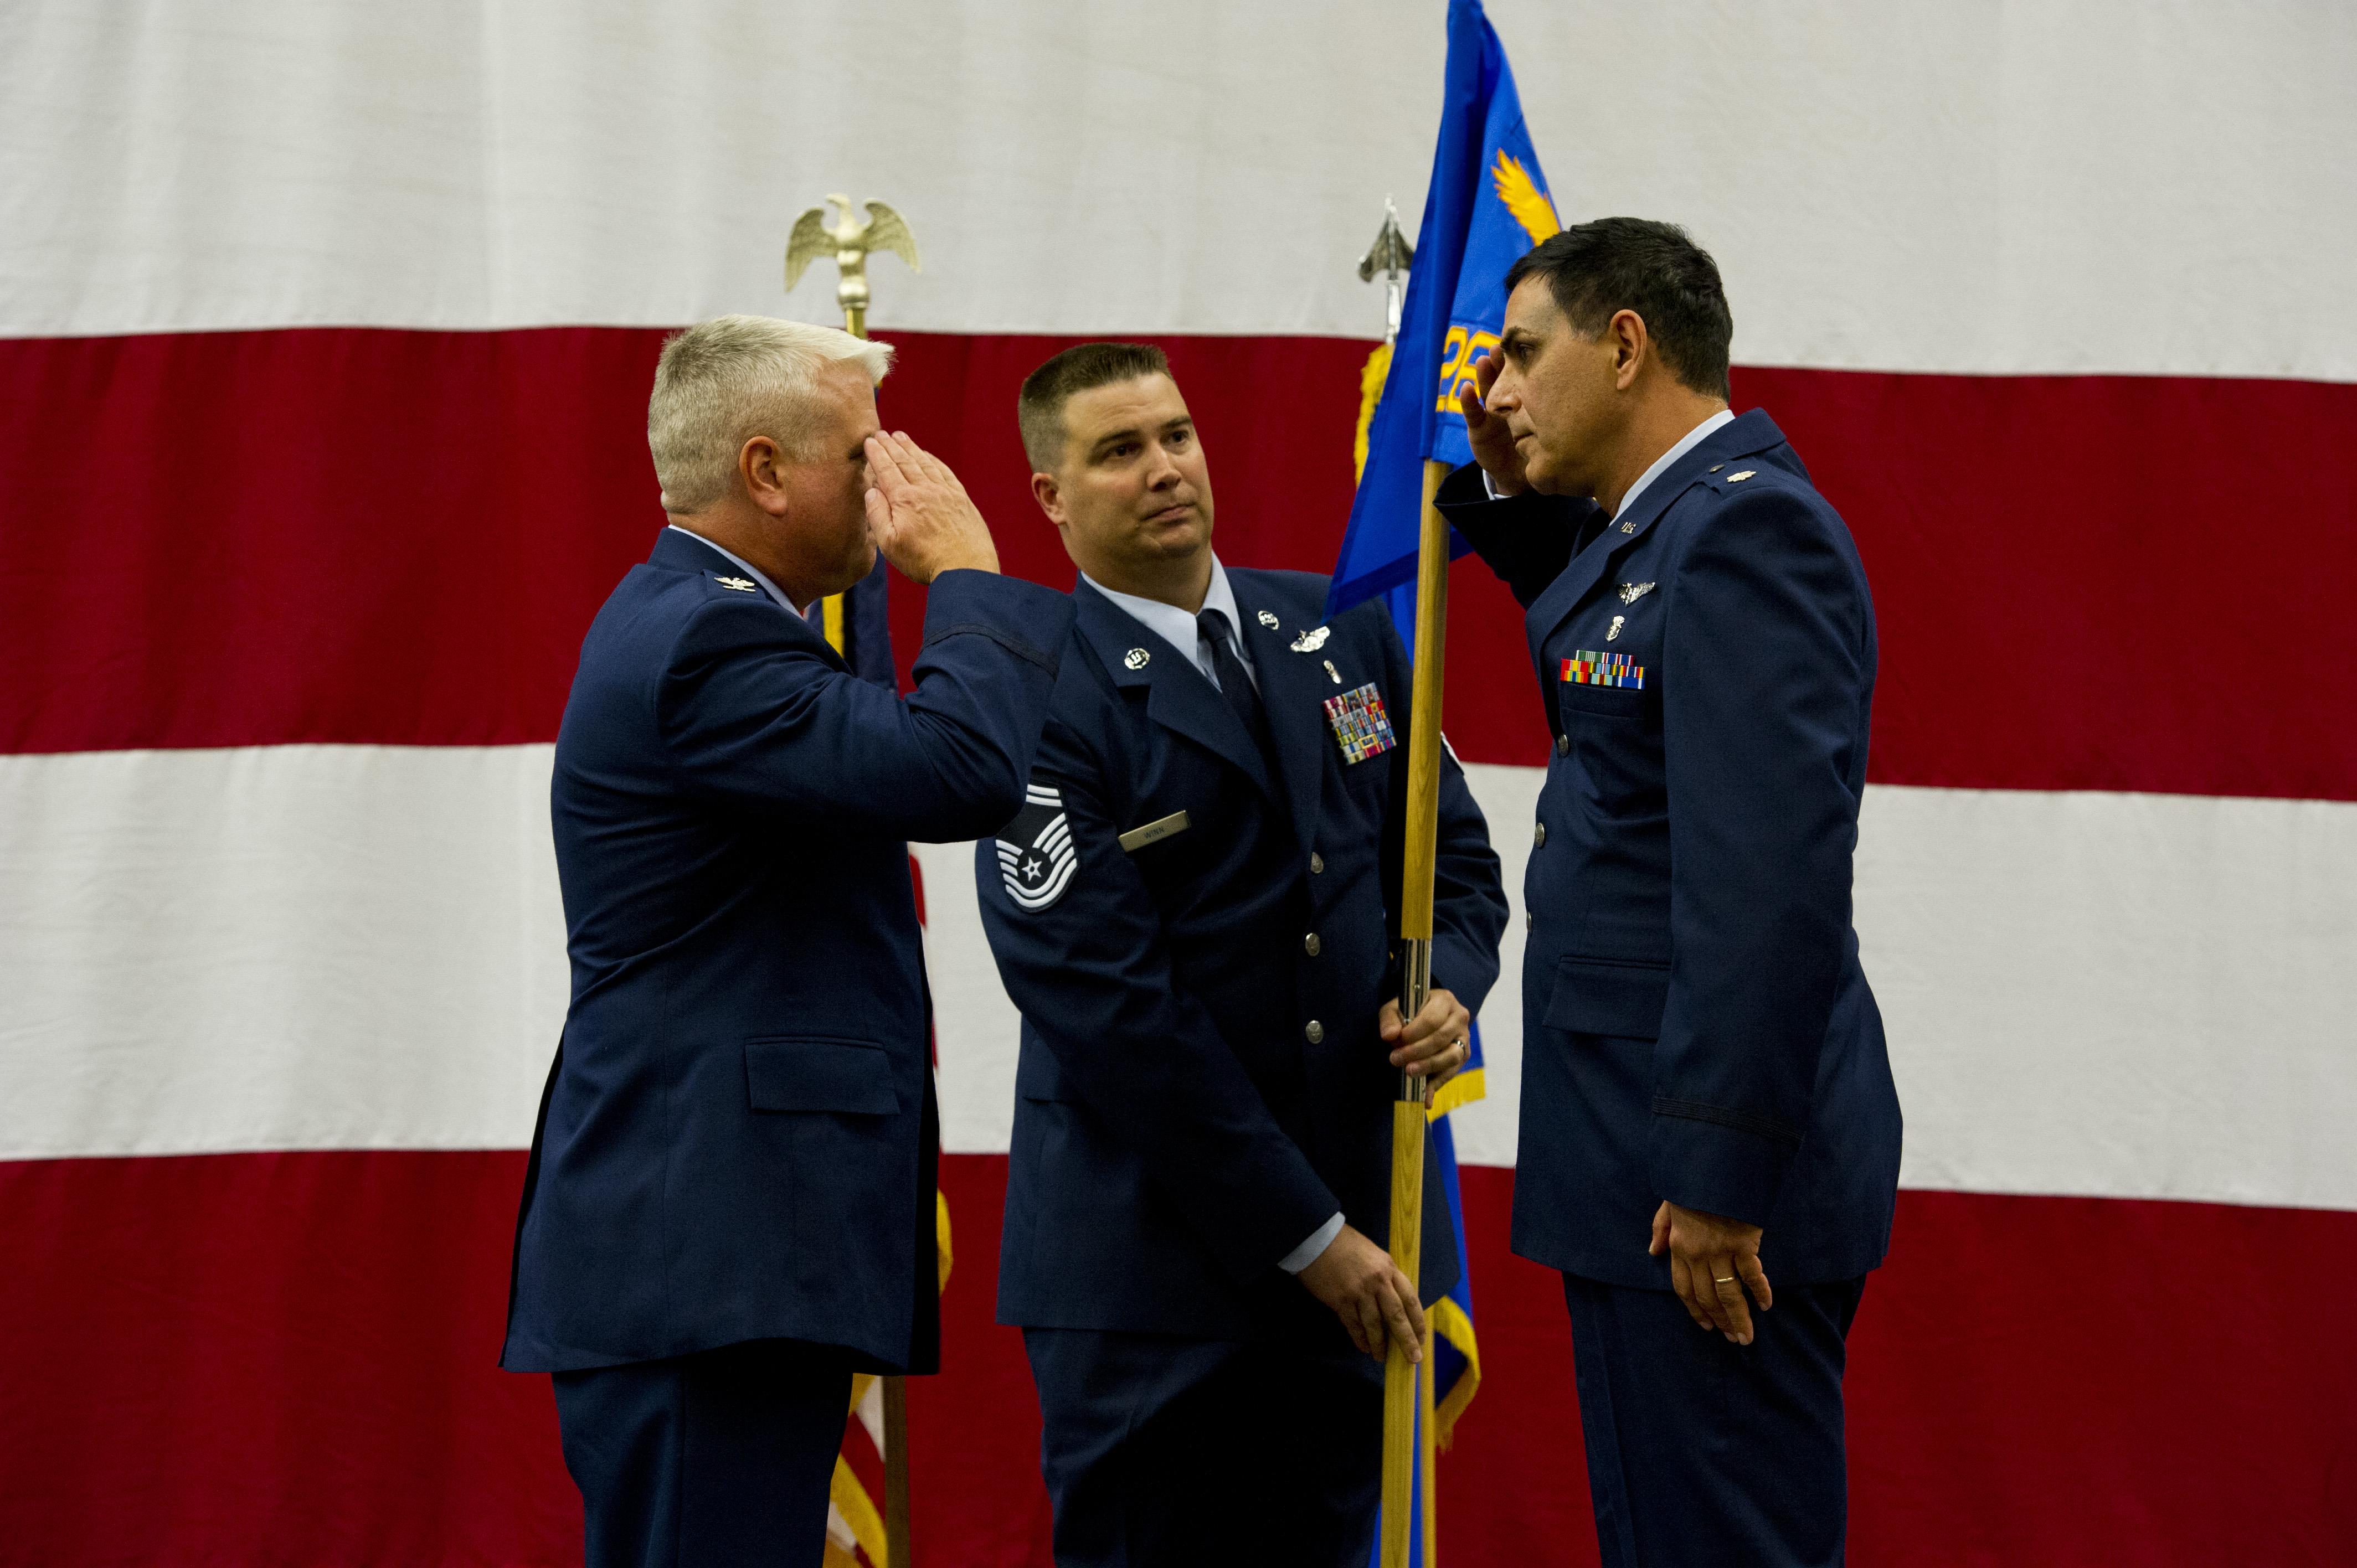 Medical squadron gets new commander > 926th Wing > Article Display